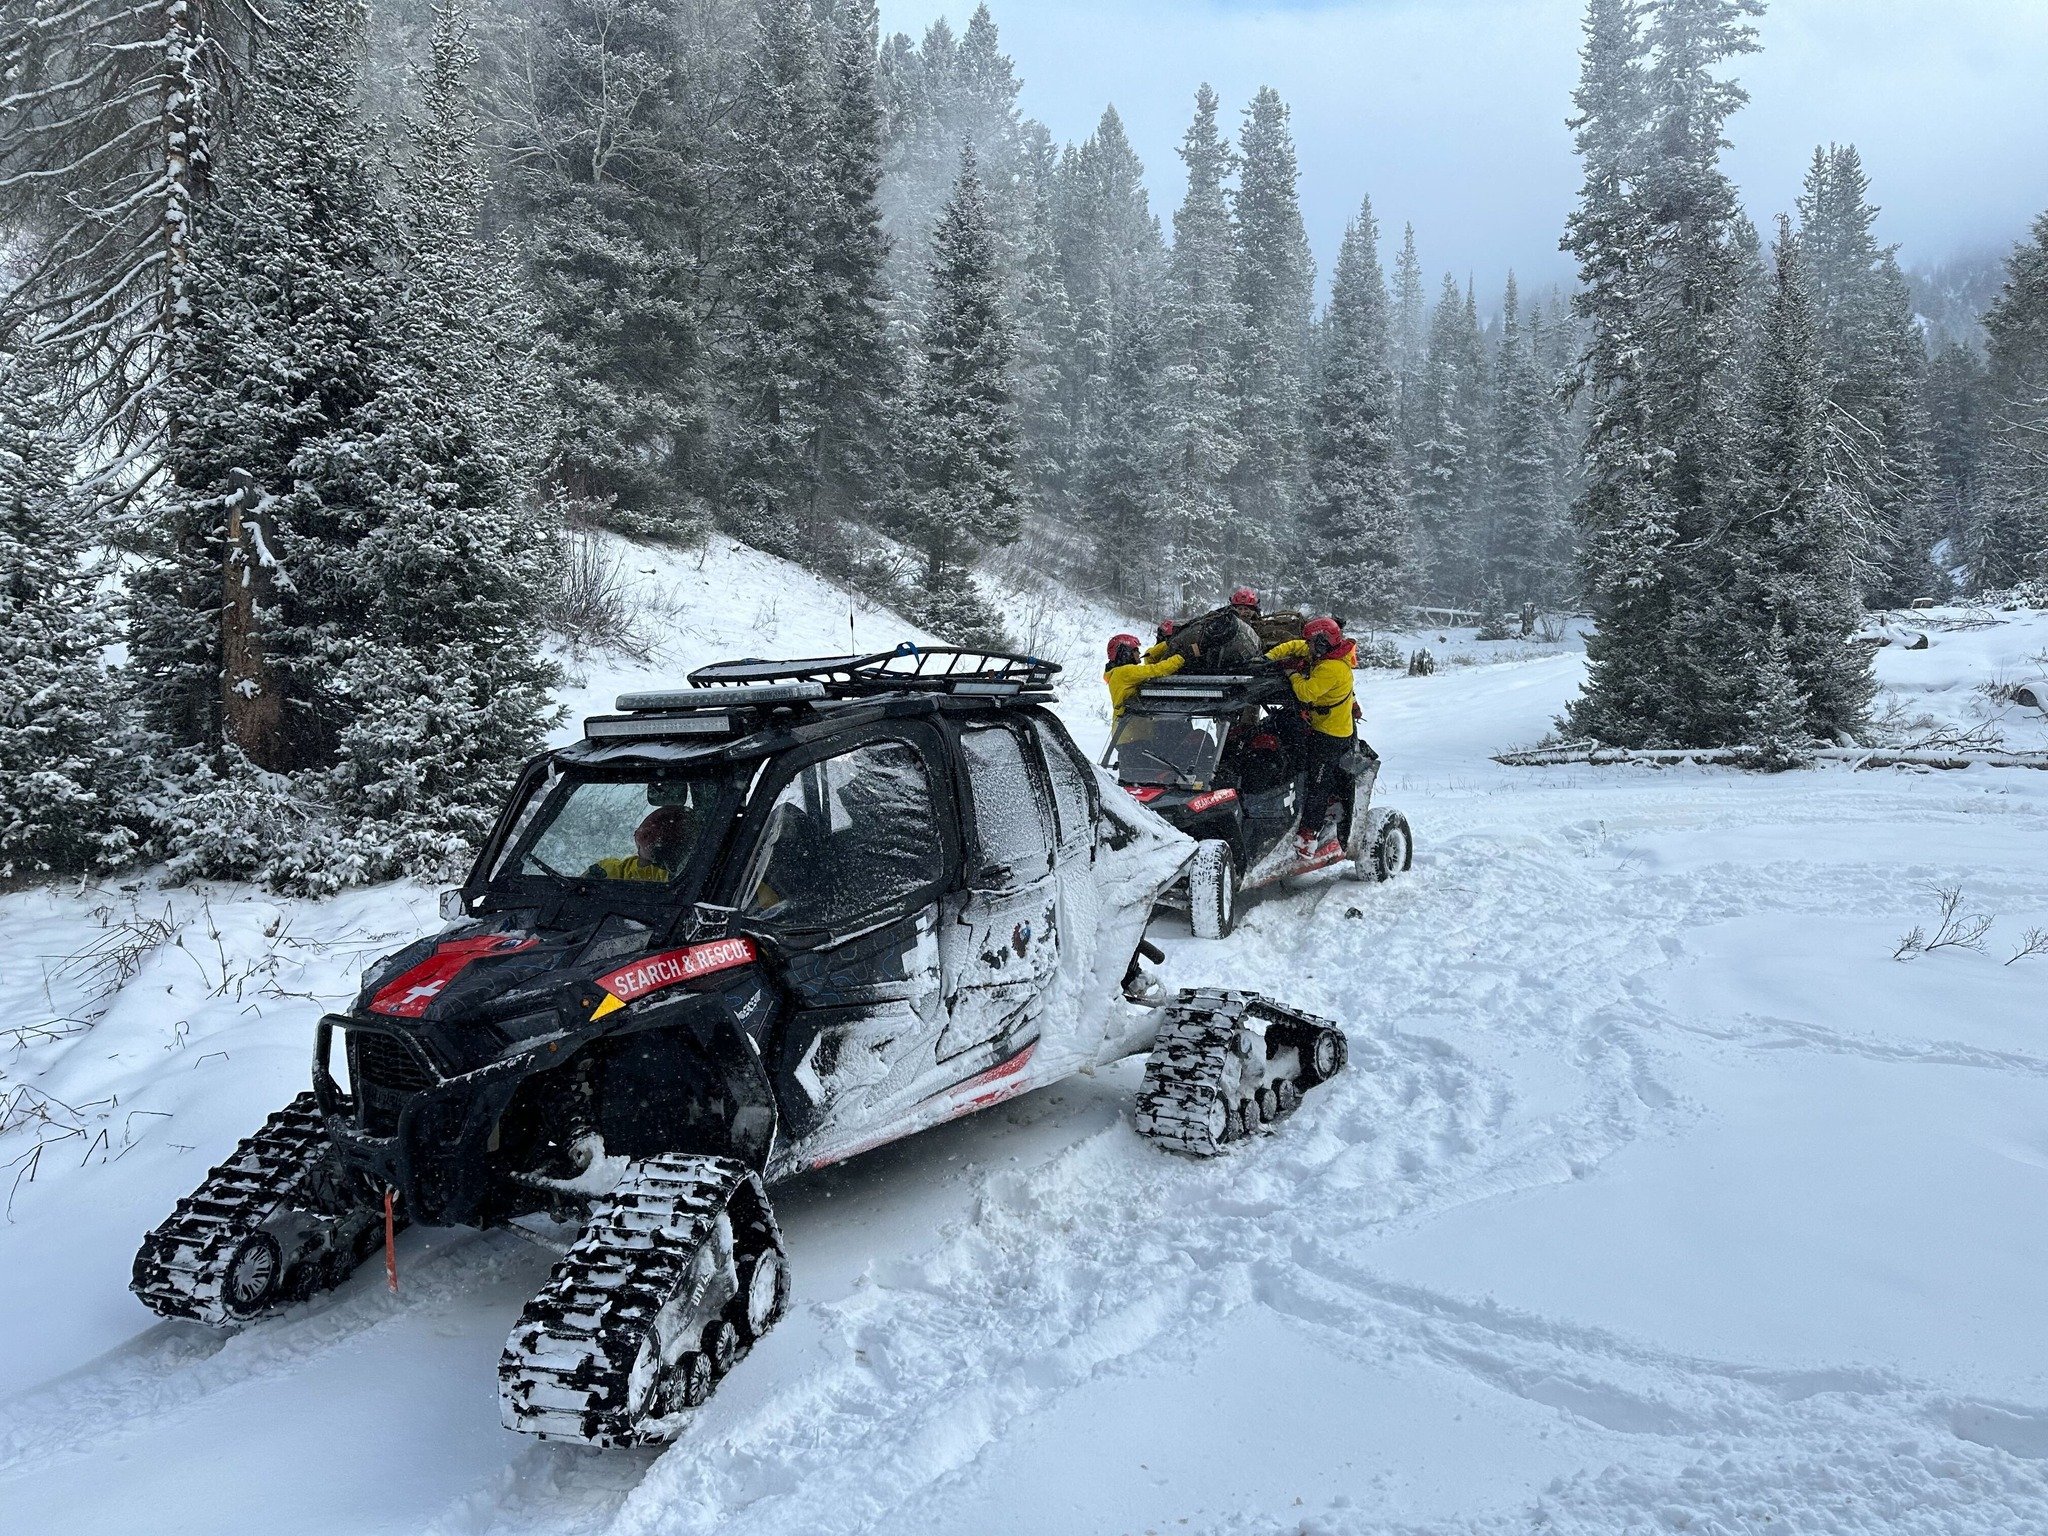 Here's a summary on the latest rescue mission from Teton County Search &amp; Rescue:

On Friday, May 3, two men from Michigan were backpacking about fives miles up Cache Creek when they became stranded by a snowstorm. After being caught by several in